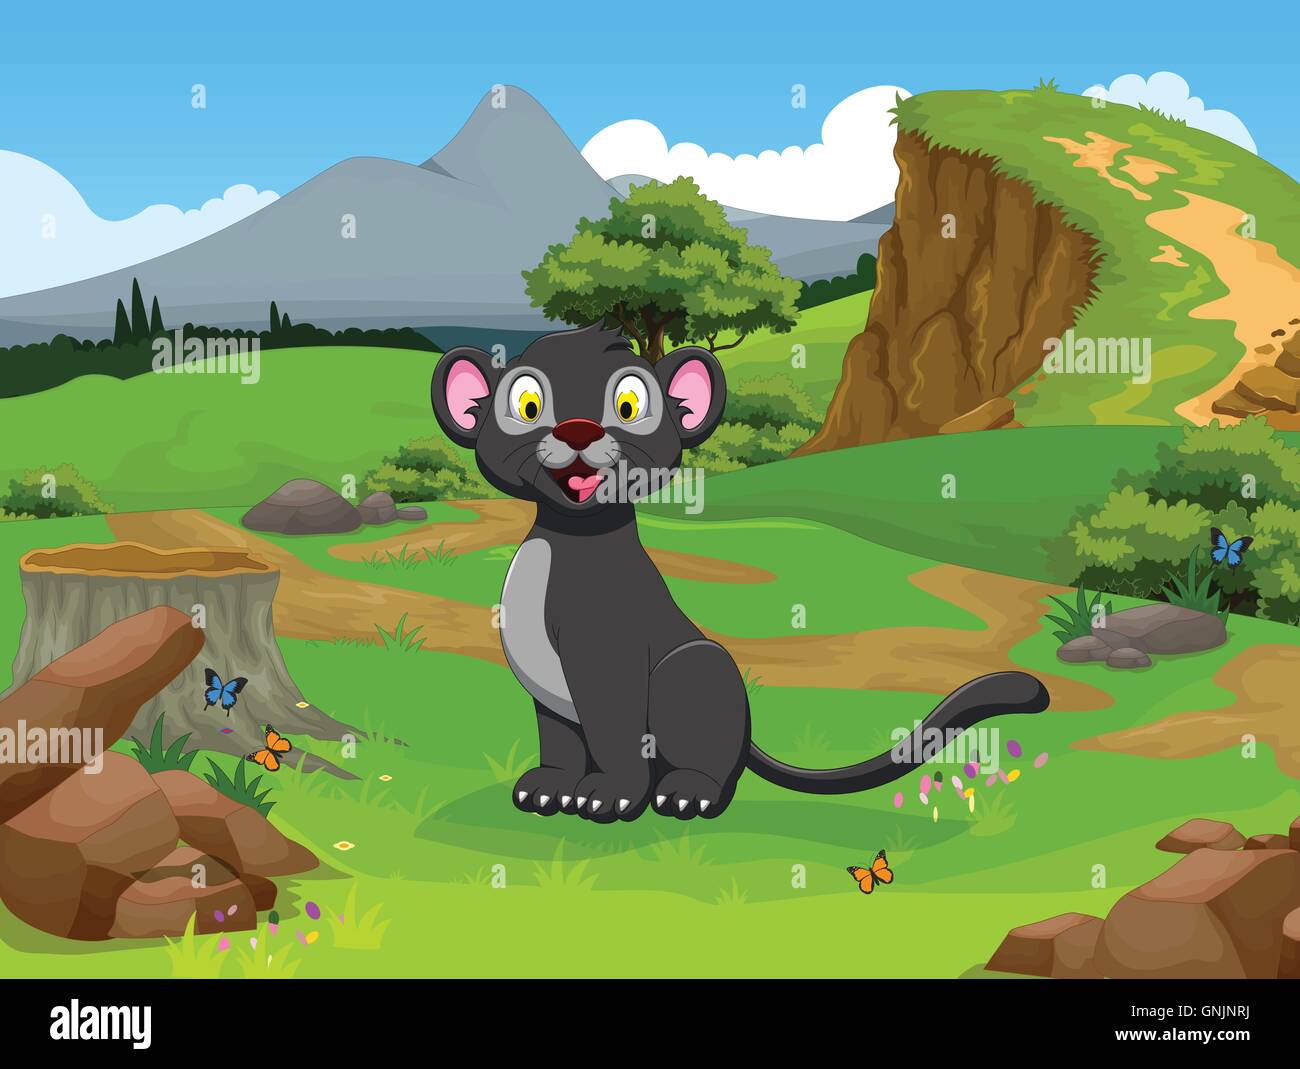 funny black panther cartoon in the jungle with landscape background Stock Vector